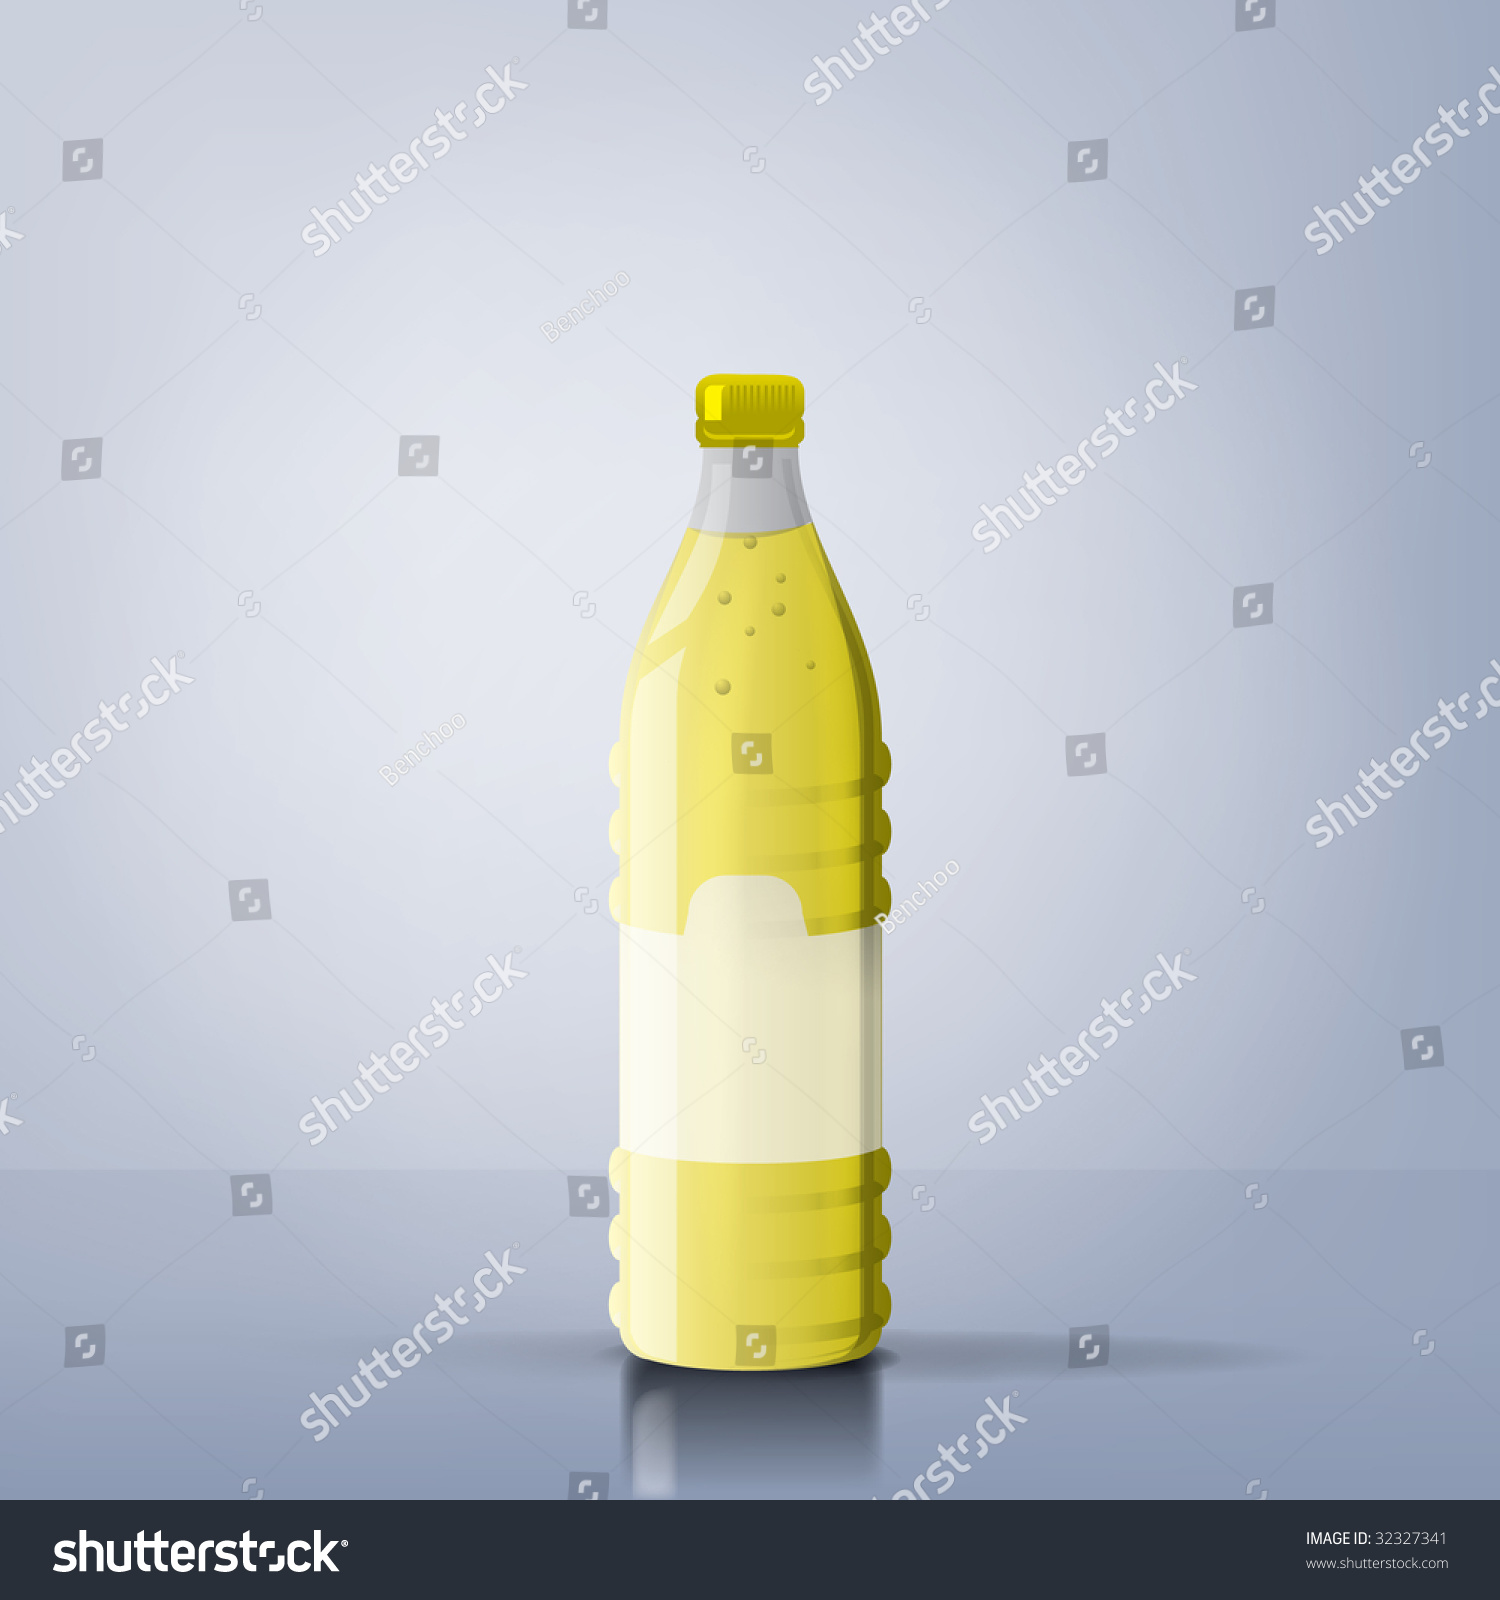 Download Illustration Yellow Juice Bottle Reflexions Stock Vector Royalty Free 32327341 PSD Mockup Templates